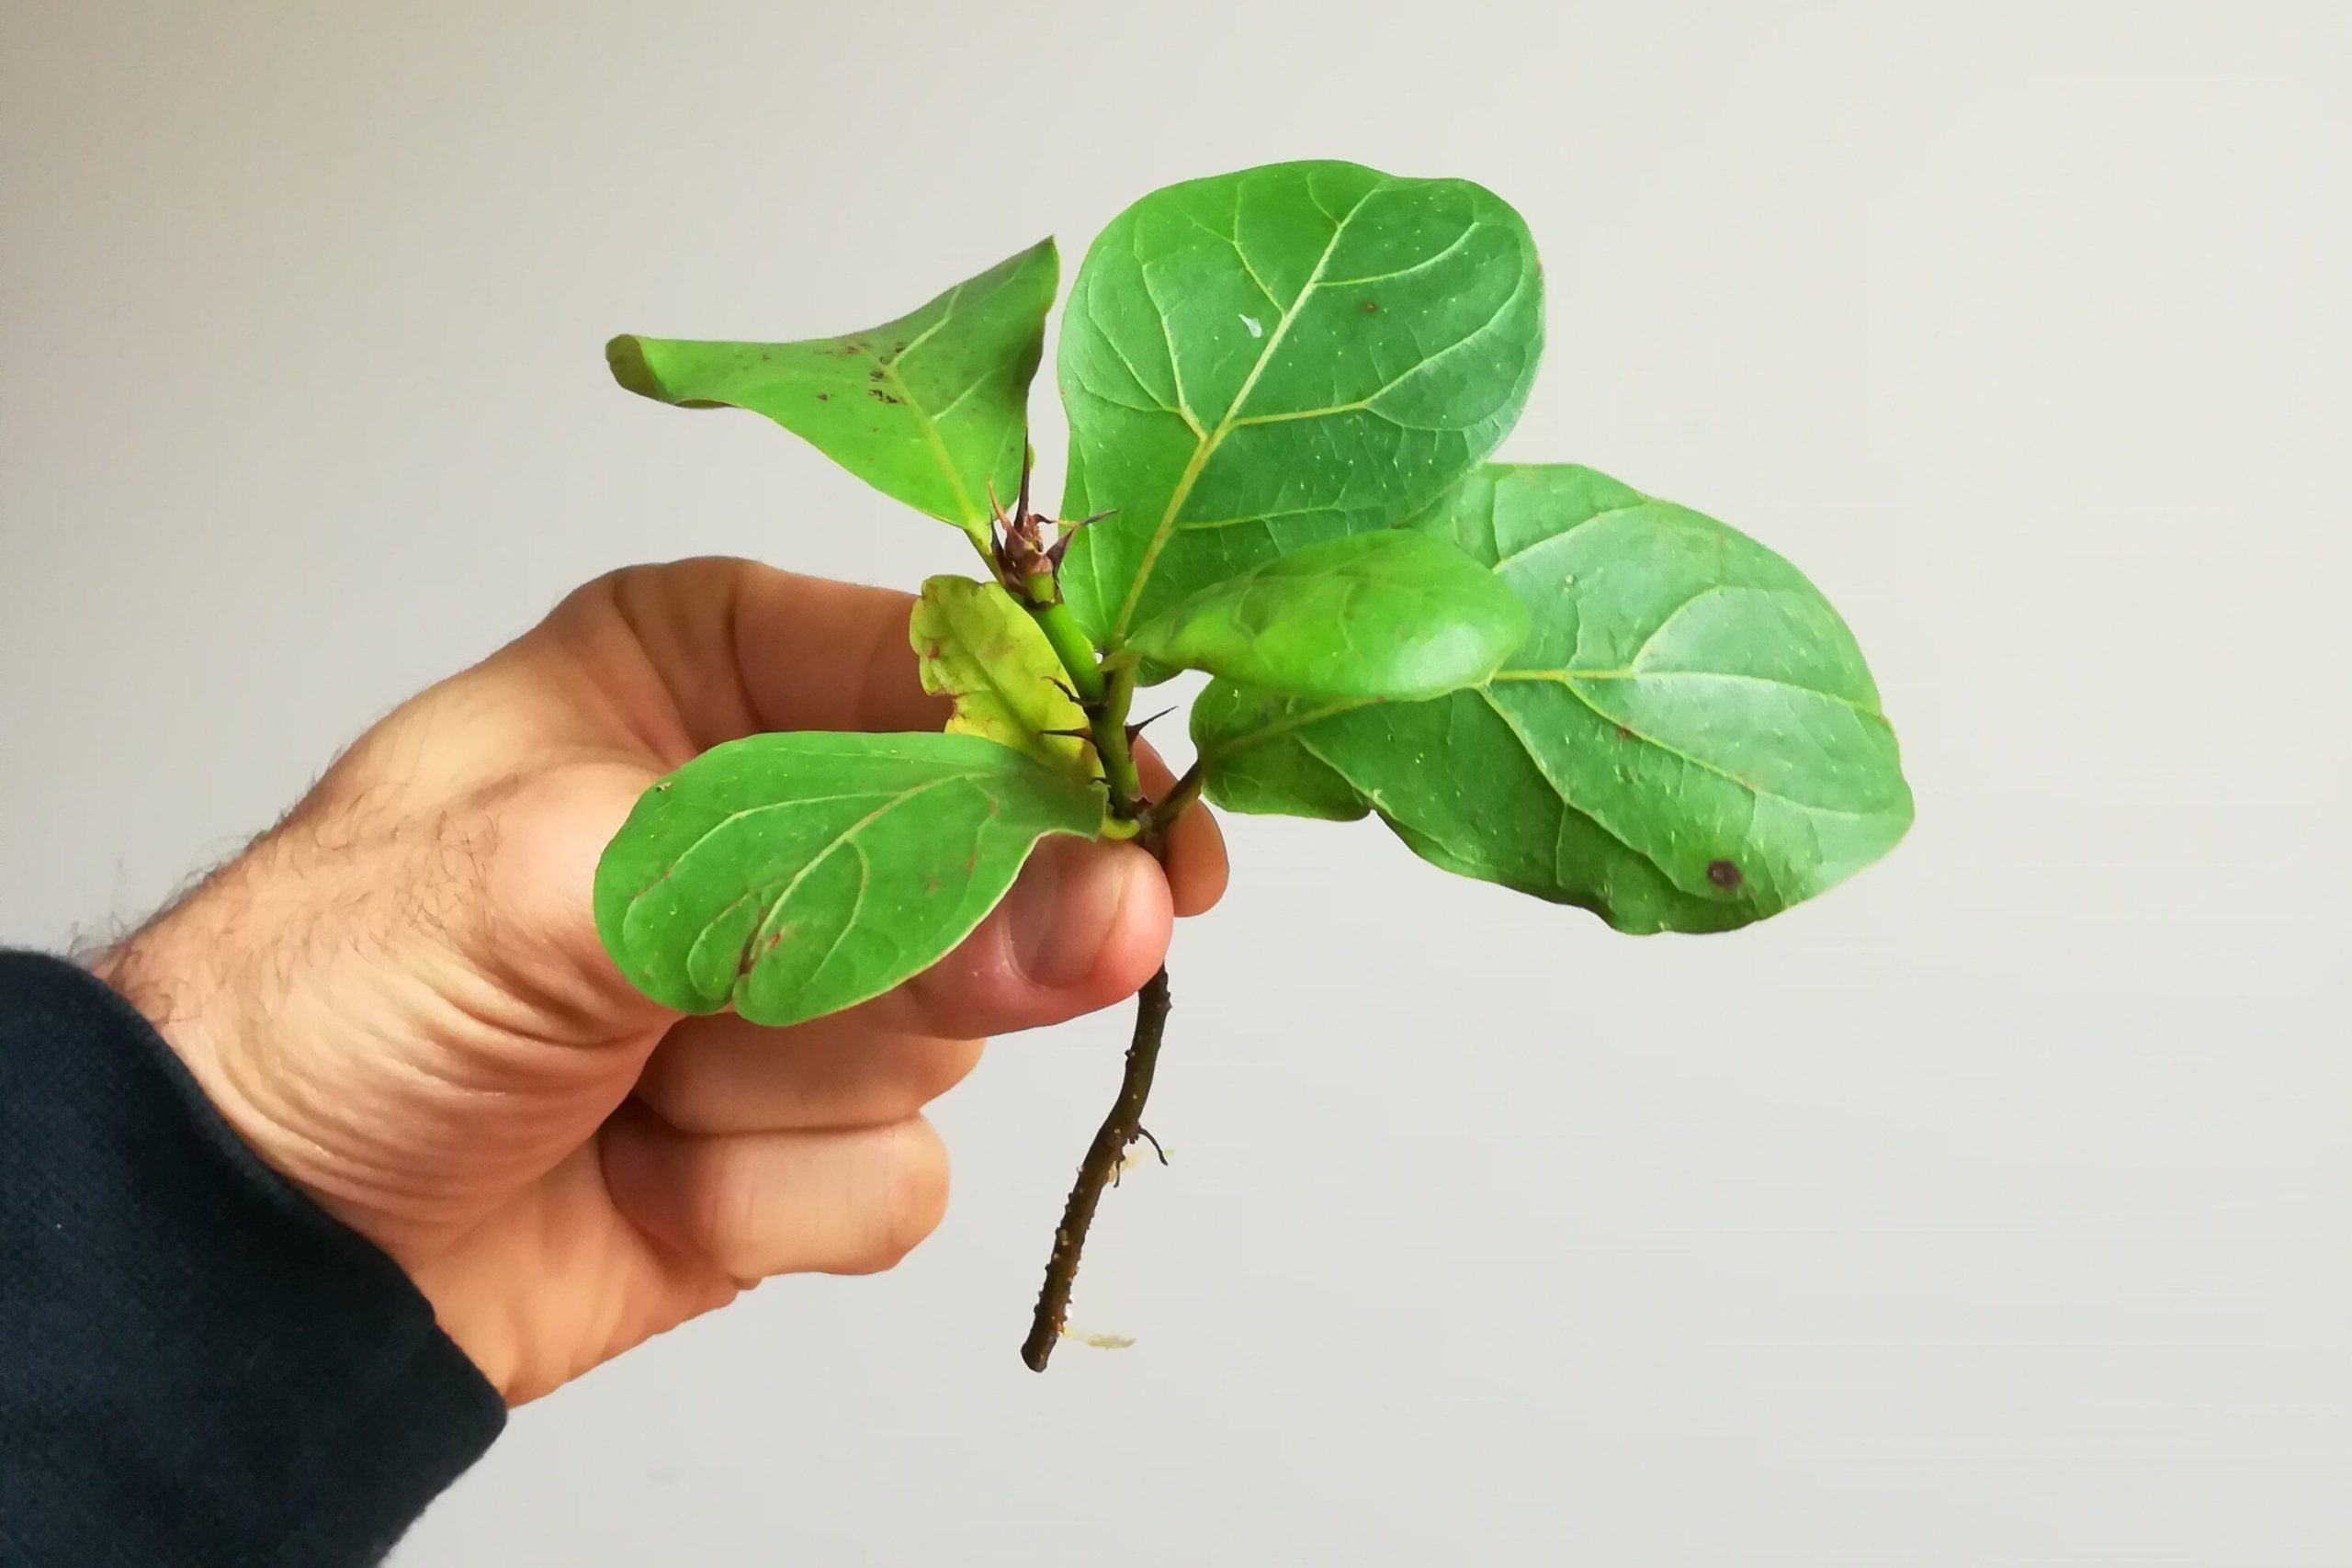 The hand is holding a Fiddle Leaf Fig cutting with four green leaves